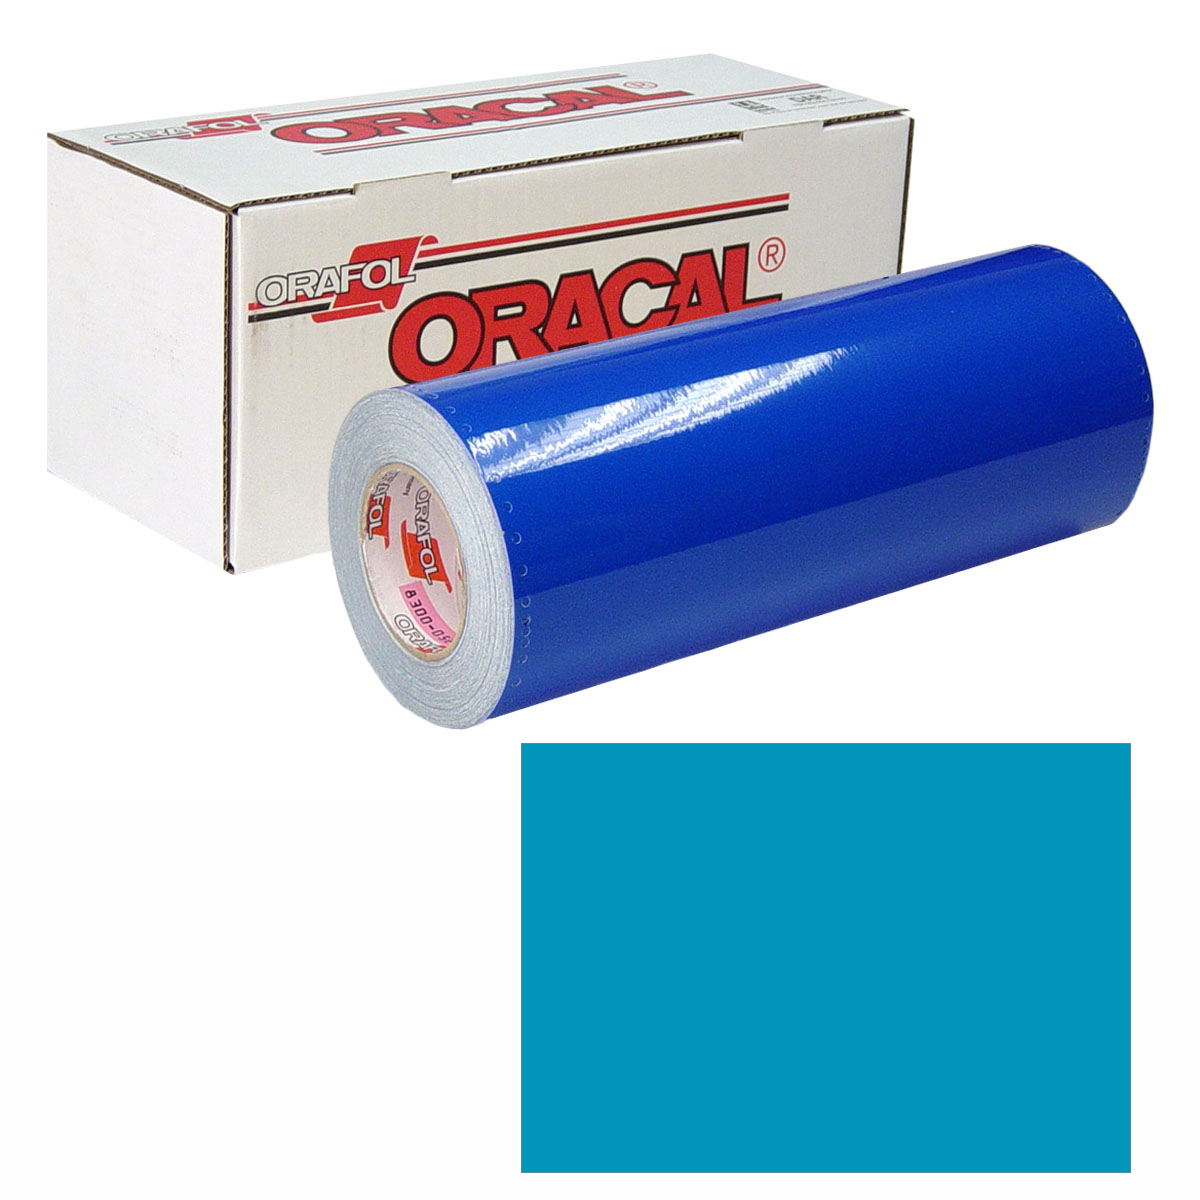 ORACAL 631 15in X 10yd 174 Teal